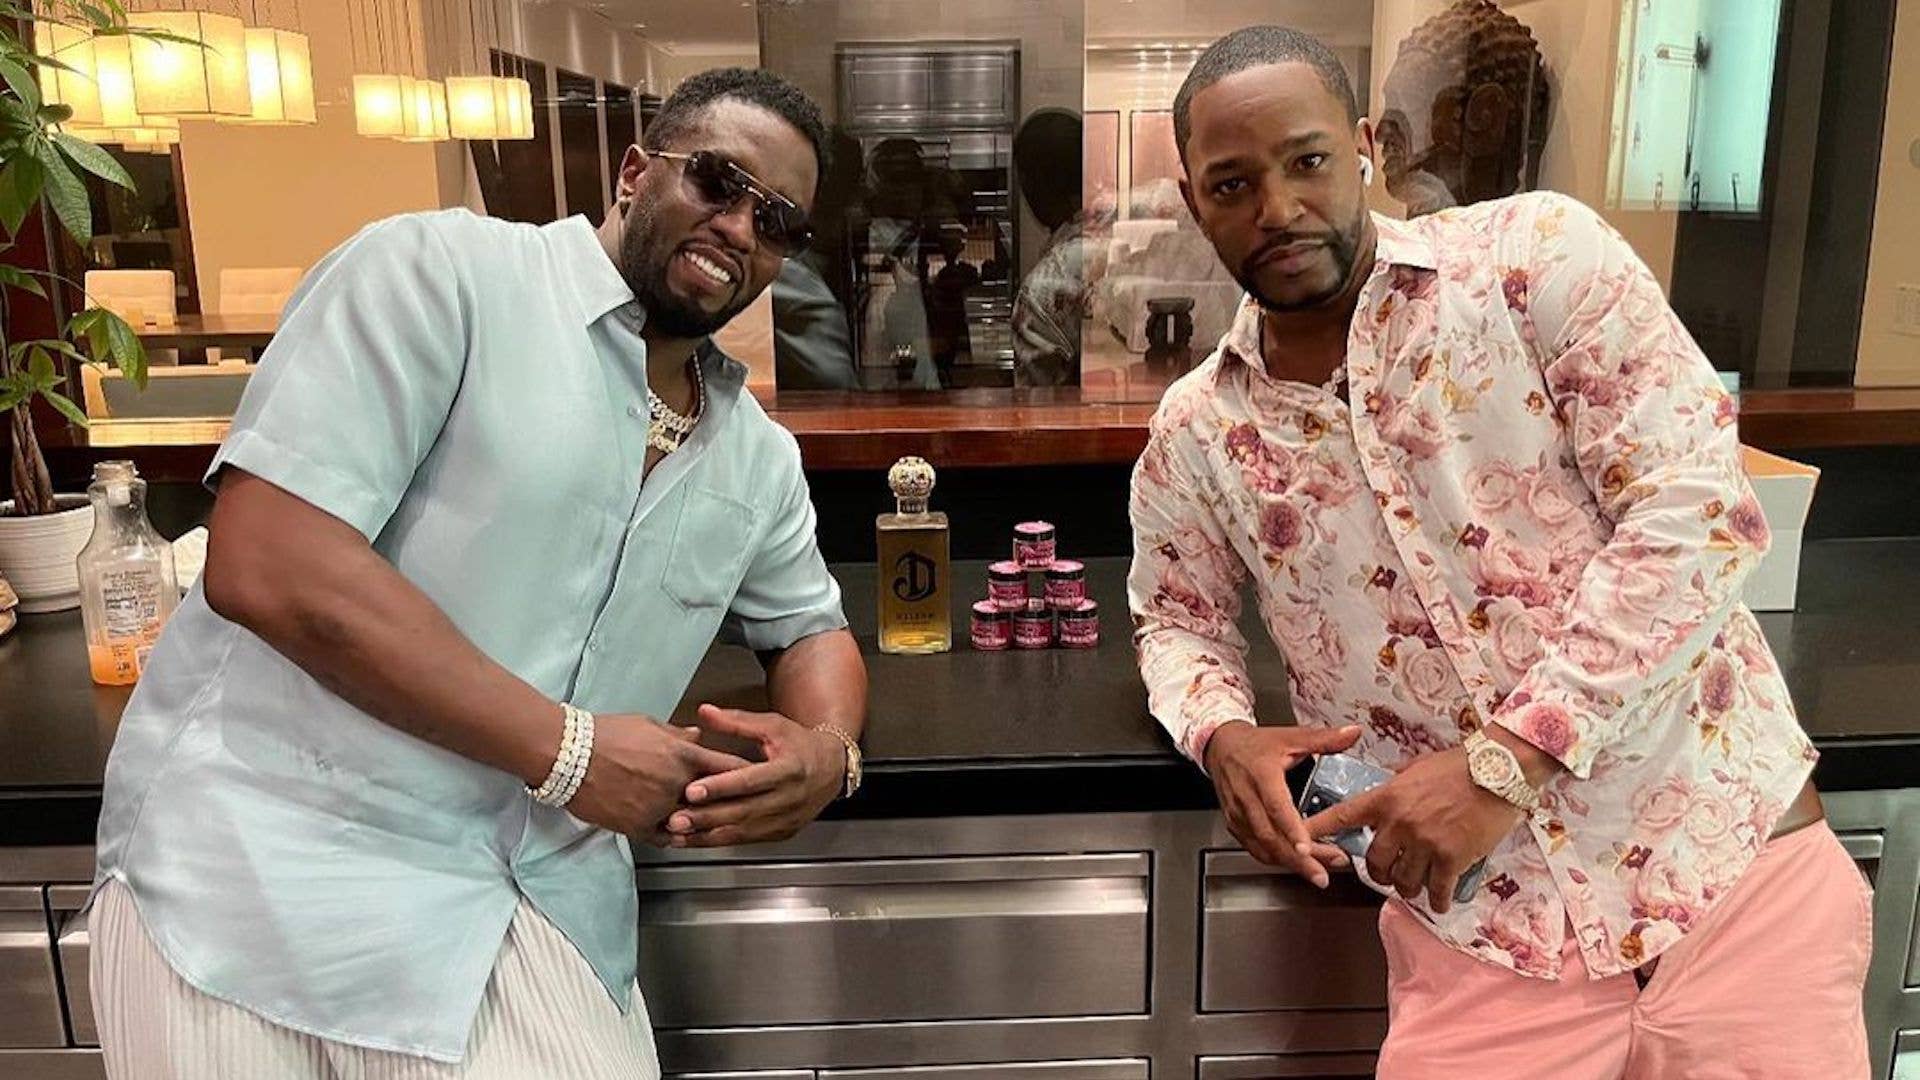 Image of Diddy and Camron with Pink Horse Power